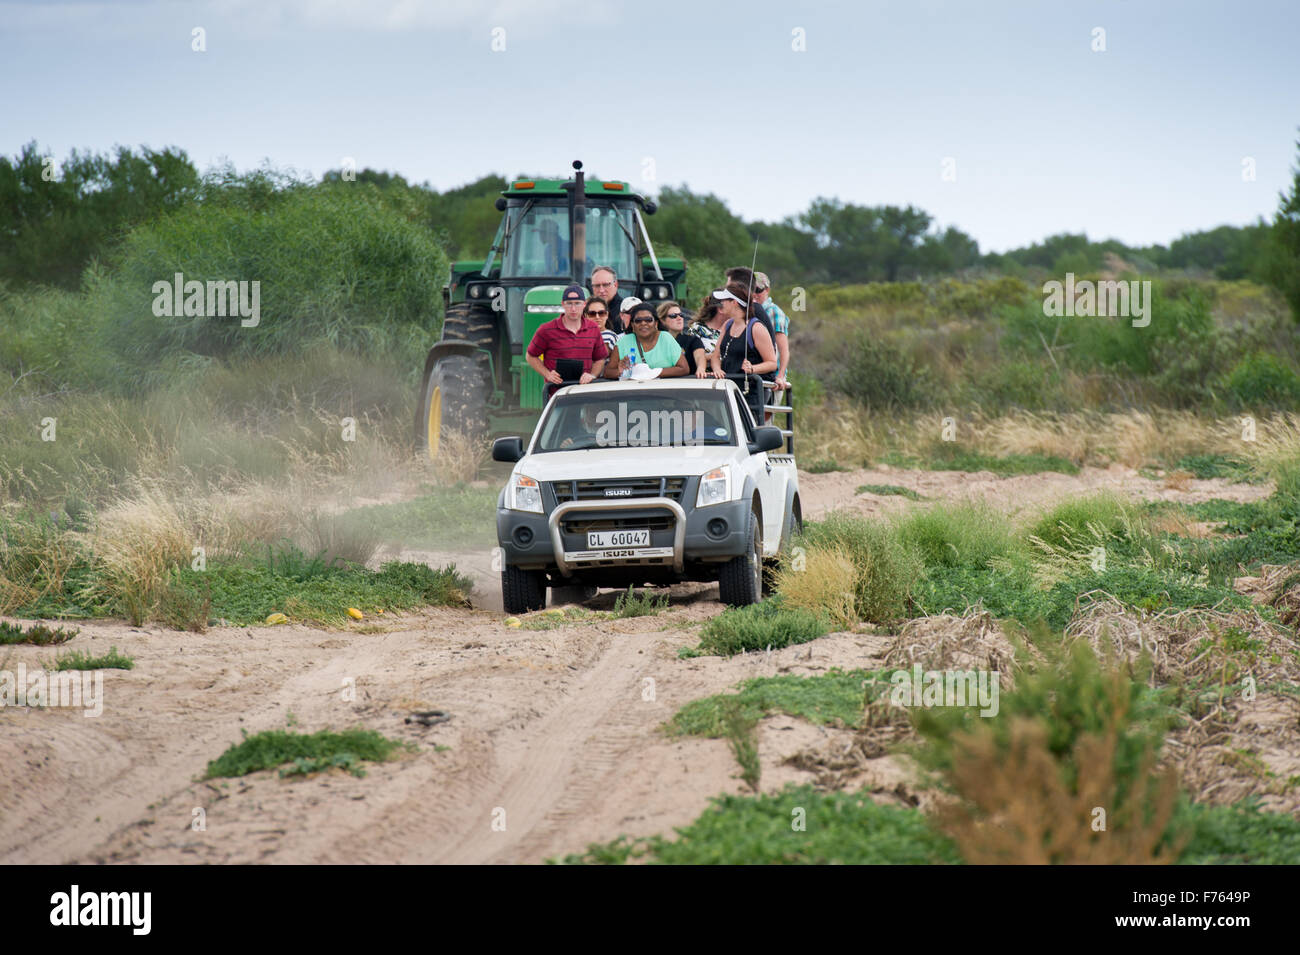 People sightseeing while riding in the back of a pickup truck in South Africa Stock Photo